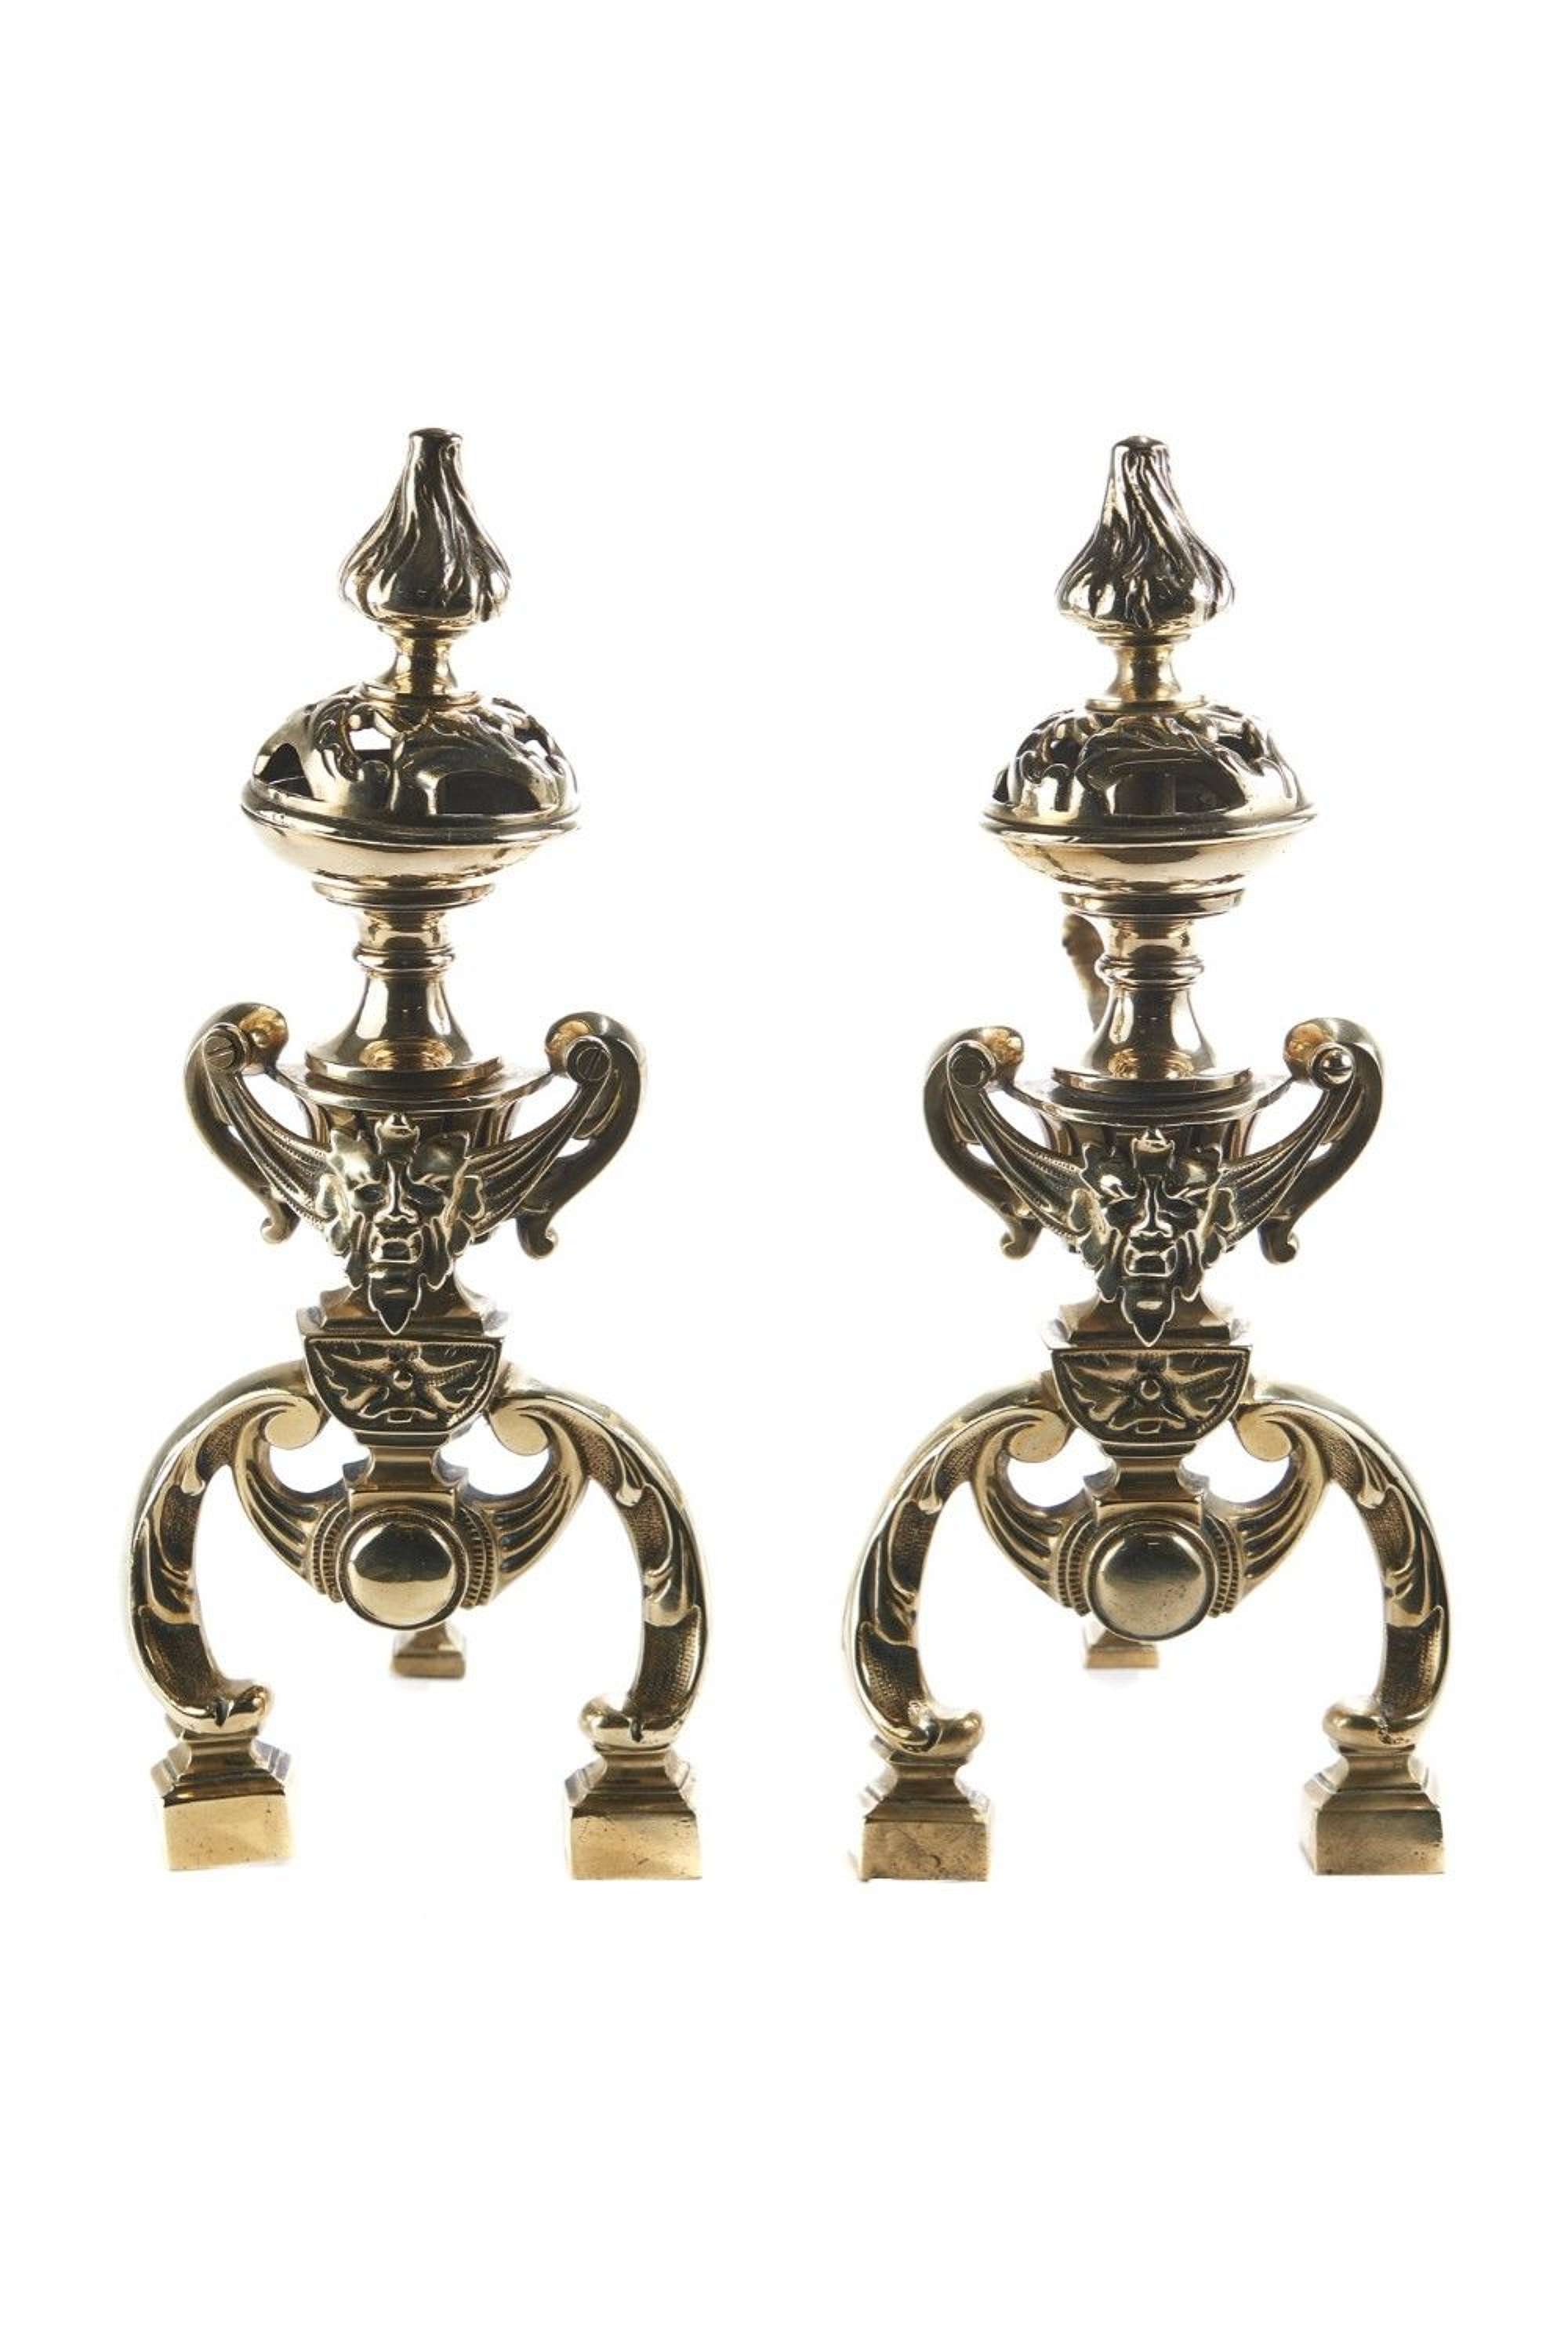 Fine Quality Pair Of Antique Victorian Ornate Brass Fire Dogs